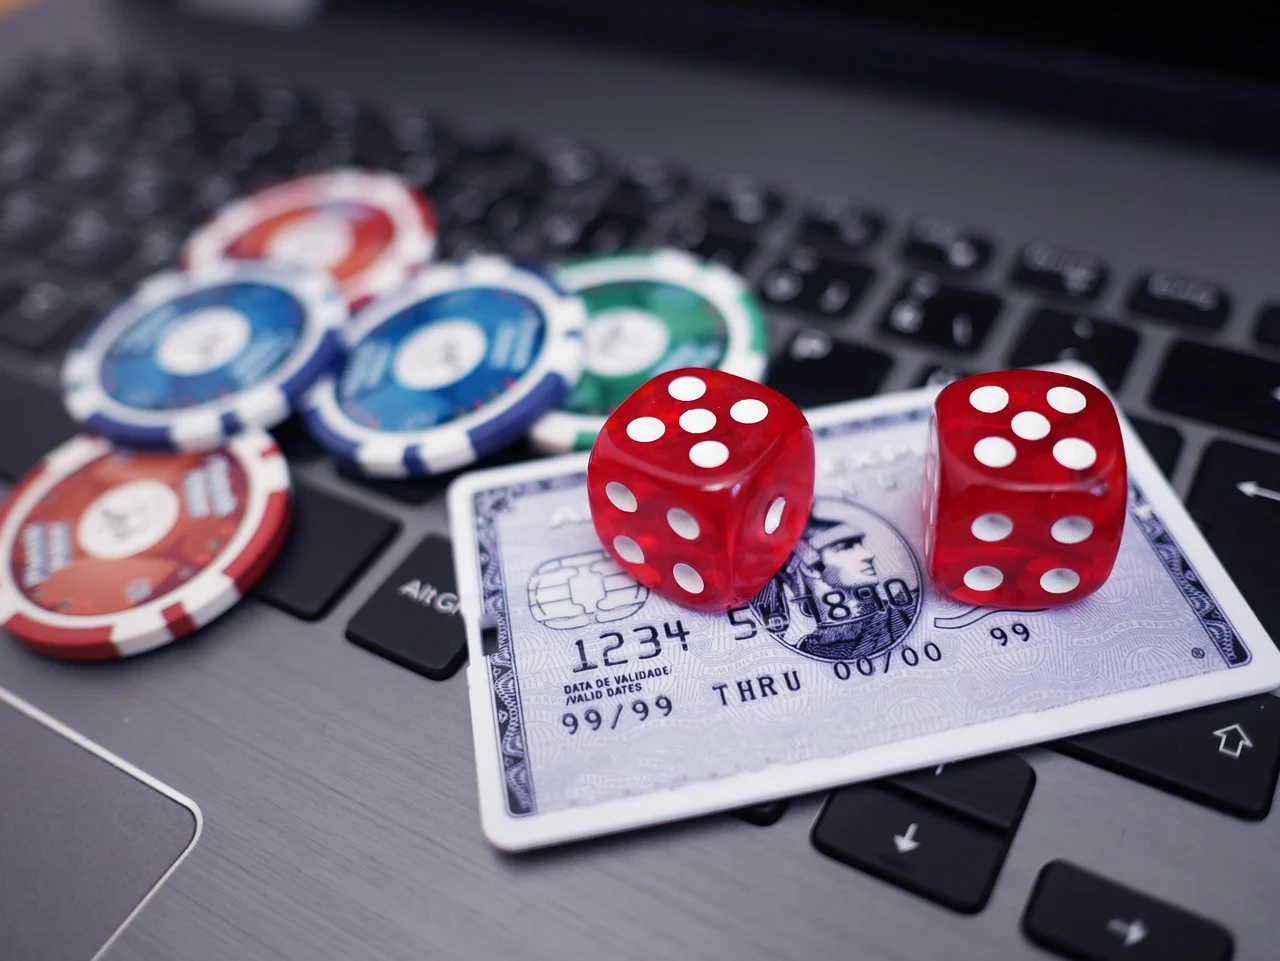 7 Ways To Keep Your primecasino Growing Without Burning The Midnight Oil